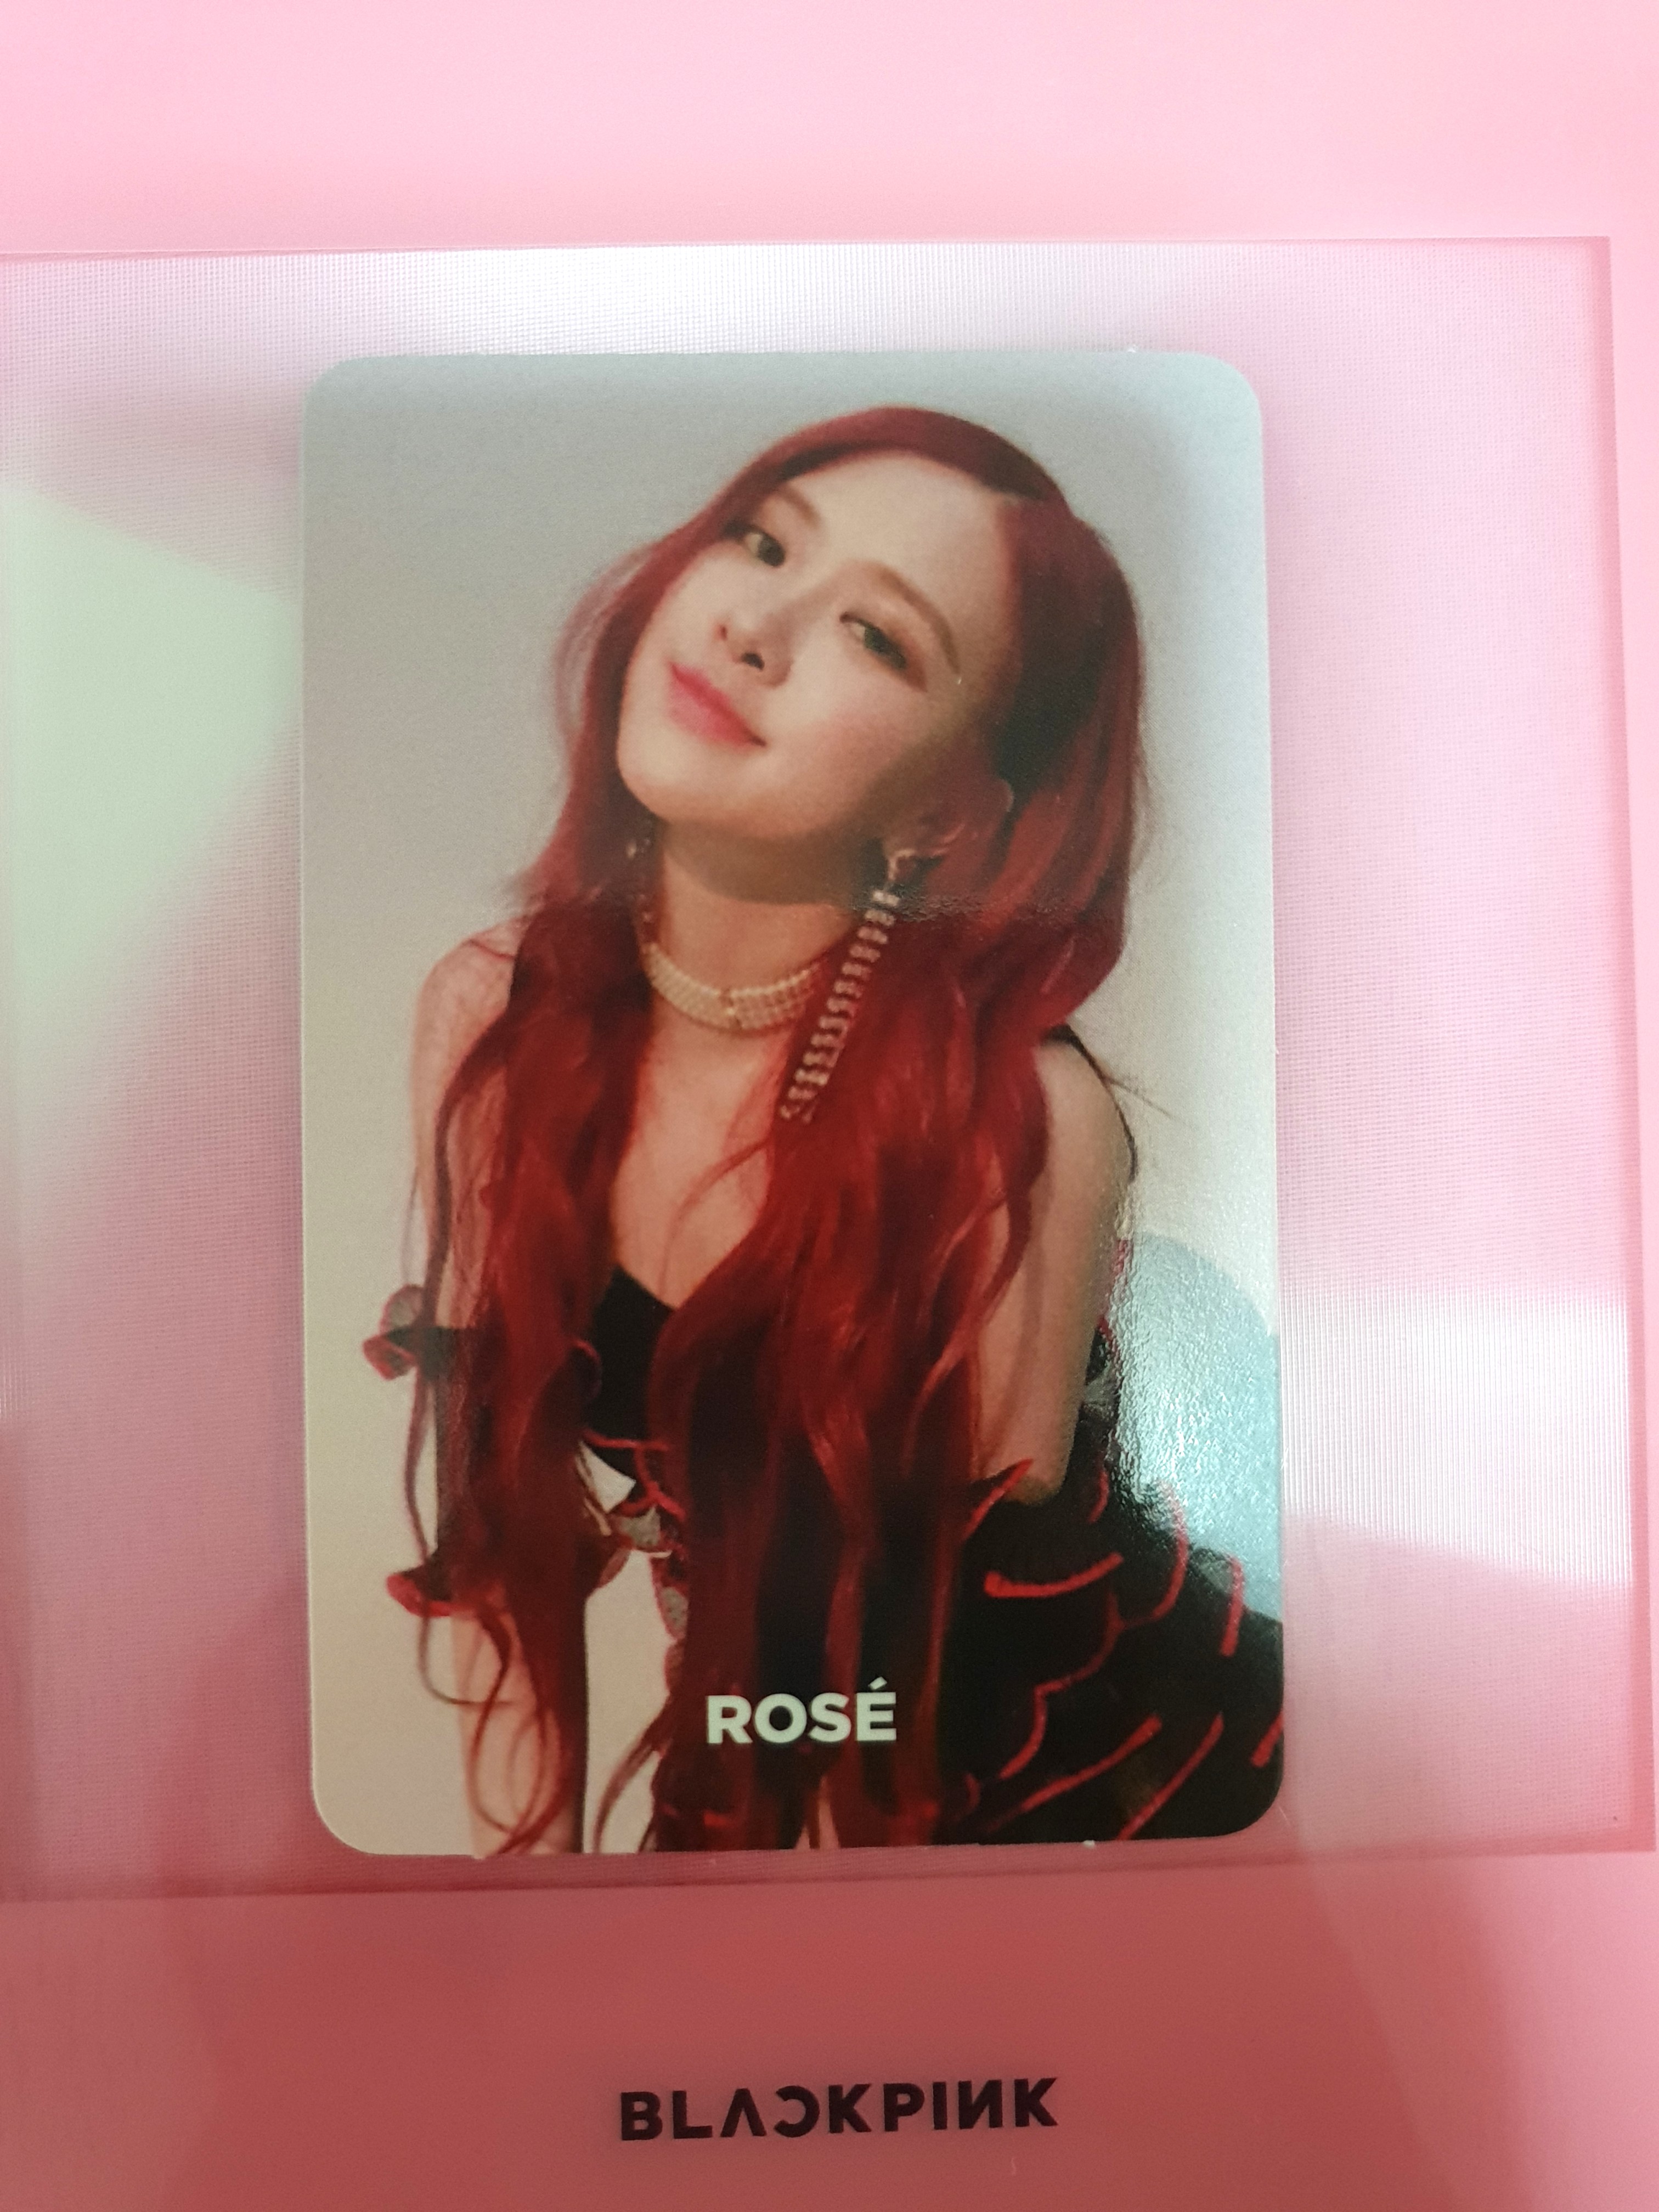 WTS Blackpink Rose Photocard pc, Entertainment, KWave on Carousell